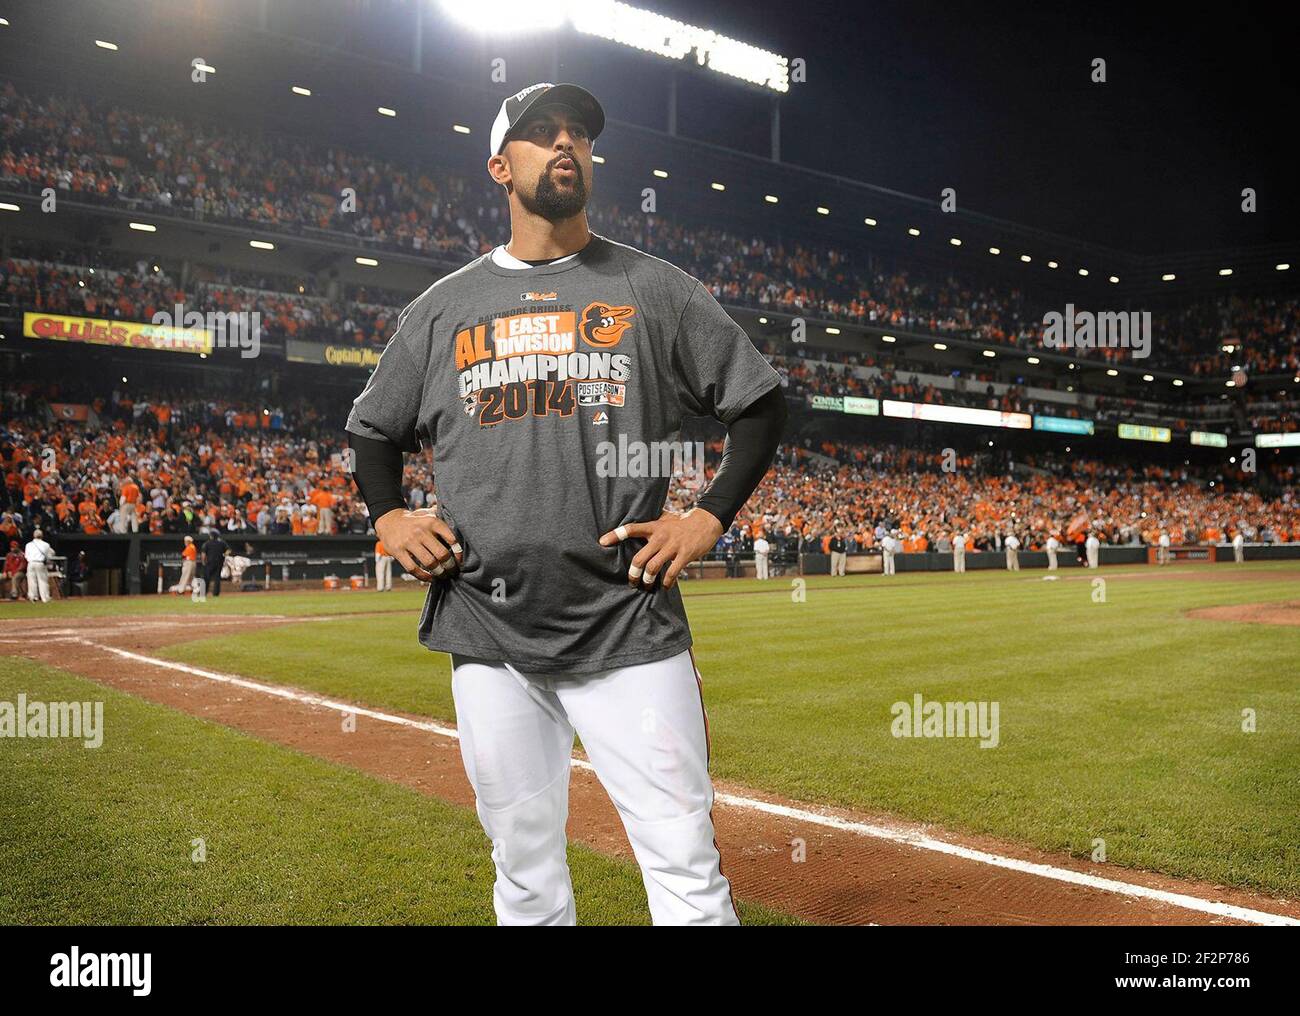 Baltimore, USA. 16th Sep, 2014. The Baltimore Orioles' Nick Markakis savors the moment as his teammates celebrate on the field after an 8-2 victory against the Toronto Blue Jays clinched the American League East division at Oriole Park at Camden Yards in Baltimore on Tuesday, Sept. 16, 2014. (Photo by Kenneth K. Lam/Baltimore Sun/TNS/Sipa USA) Credit: Sipa USA/Alamy Live News Stock Photo